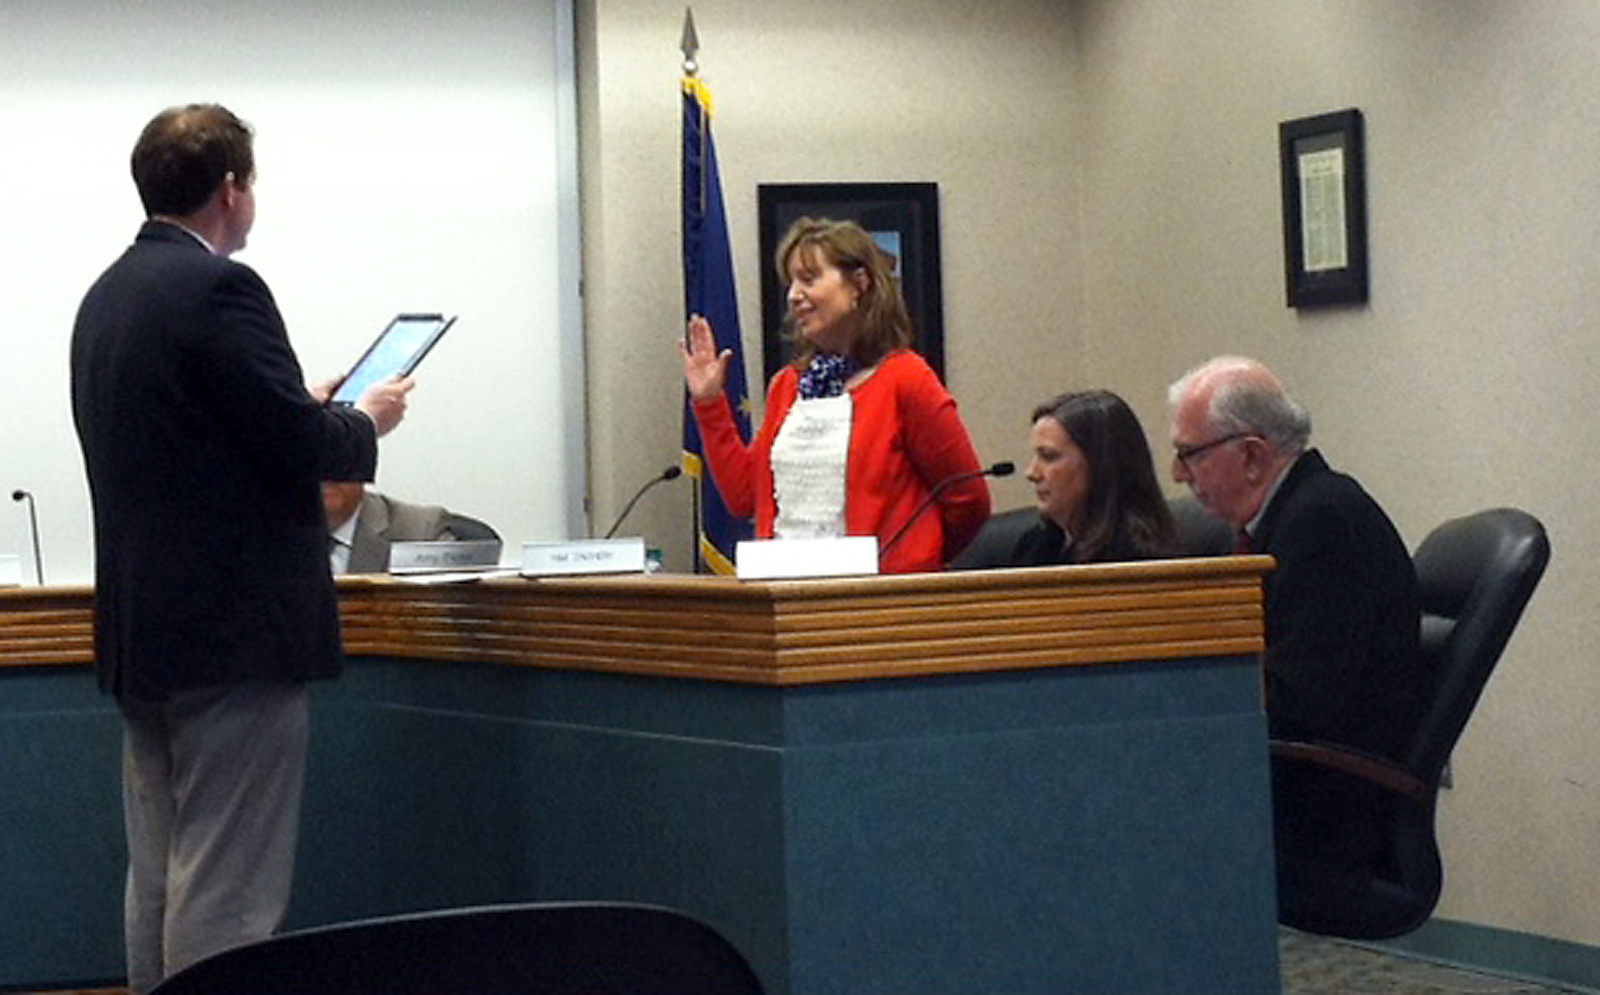 Amy Pictor takes the oath of office during the Westfield Washington School Board meeting on March 11. (Photo by Lauren Olsen)